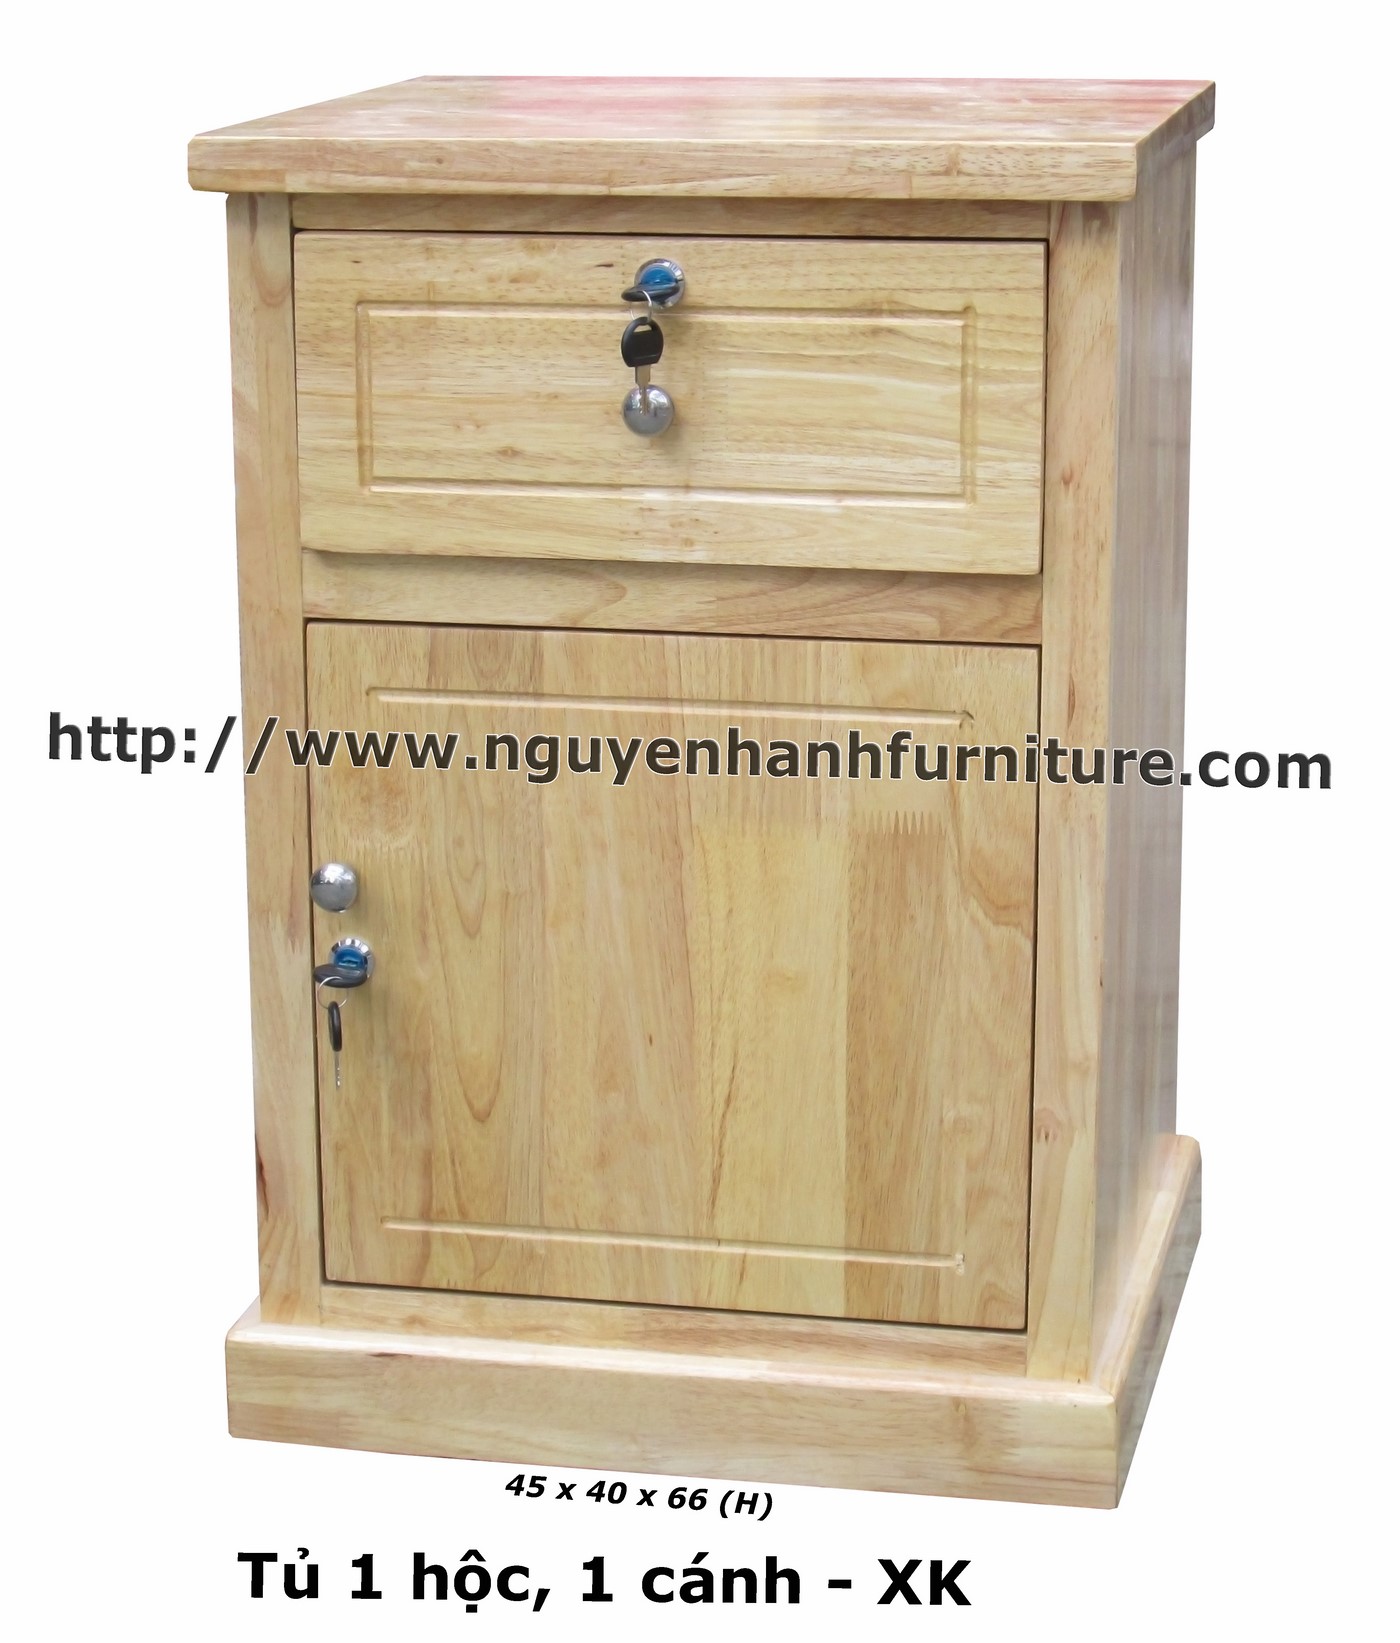 Name product: Headboard cabt (1 drawer, 1 door) Naturainel- Dimensions: 45 x 40 x 66 (H) - Description: Wood natural rubber